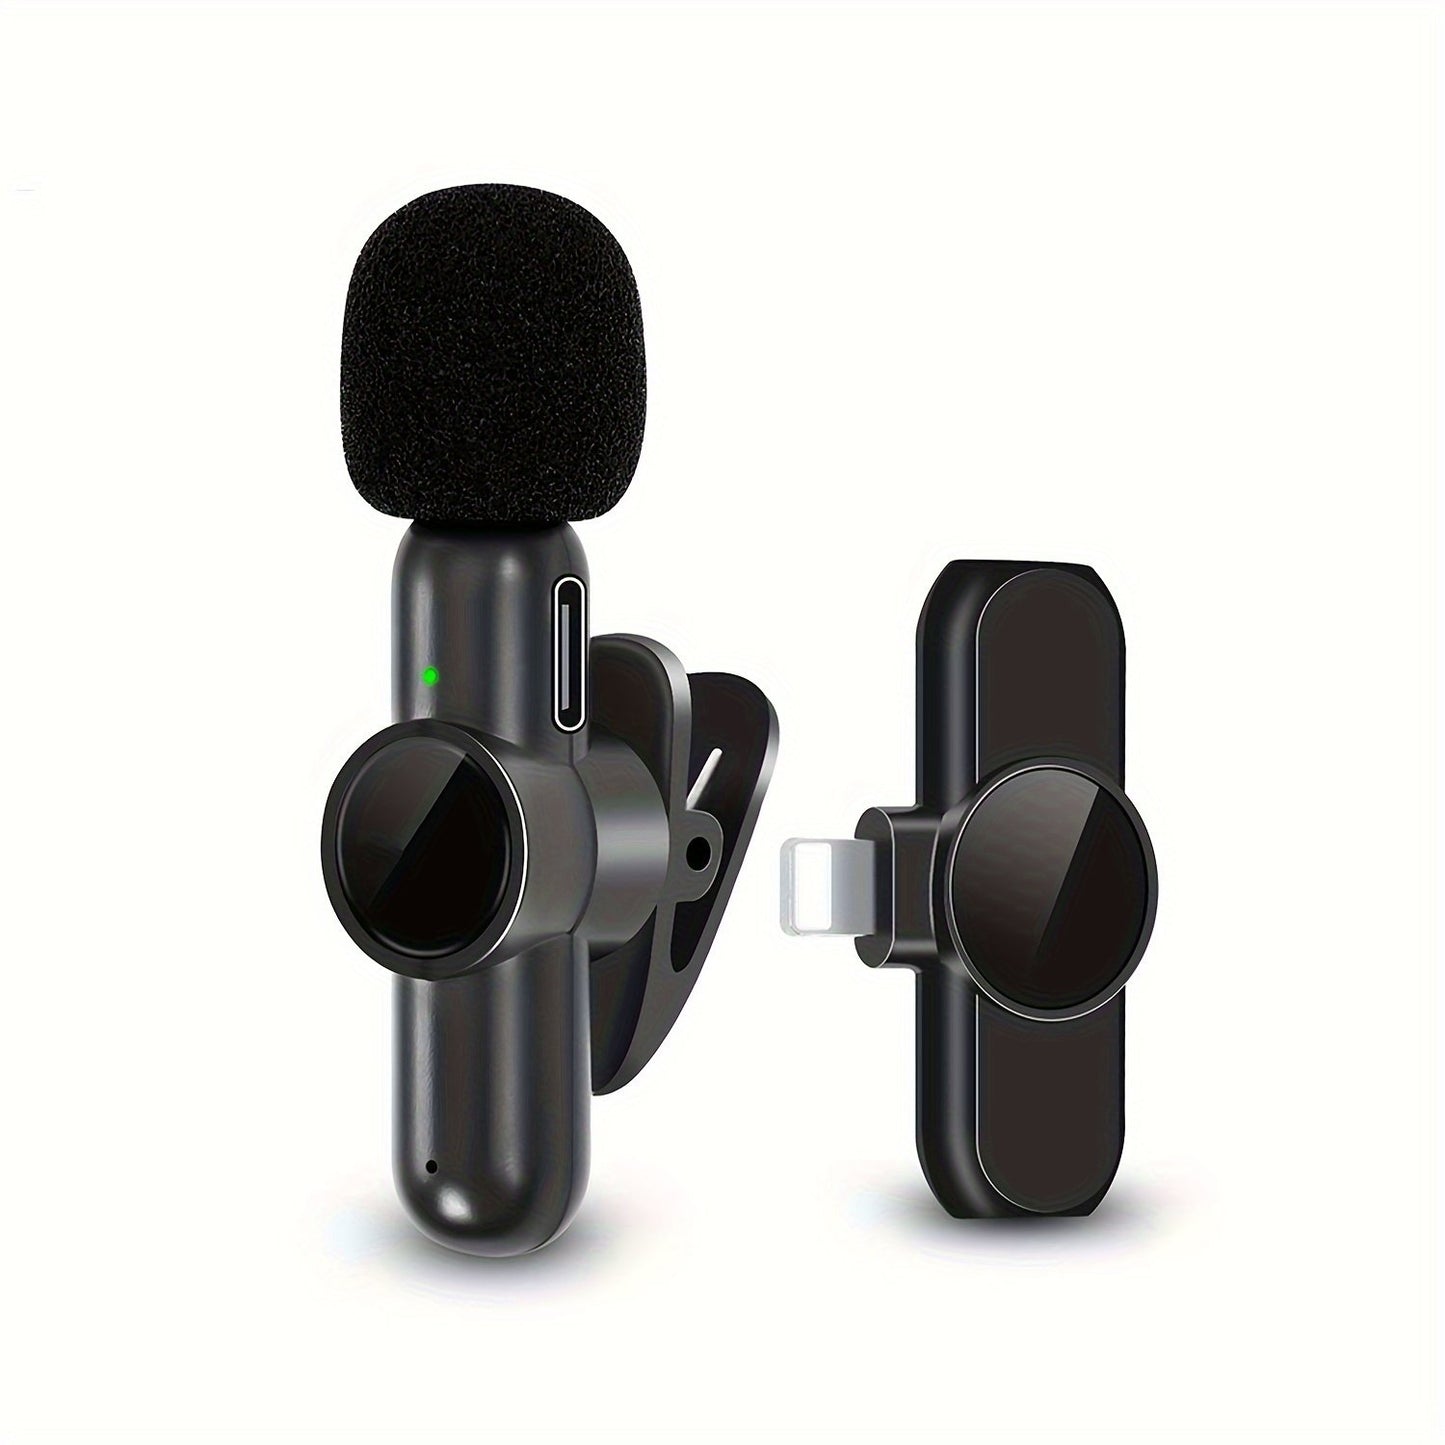 Wireless Lavalier Microphone, Clip Rotatable Wireless Microphone For IPhone For IPad Android USB-C, Cordless Clip-on Microphone, Plug And Play, Audio Video Recording, Live Streaming, Interviews.